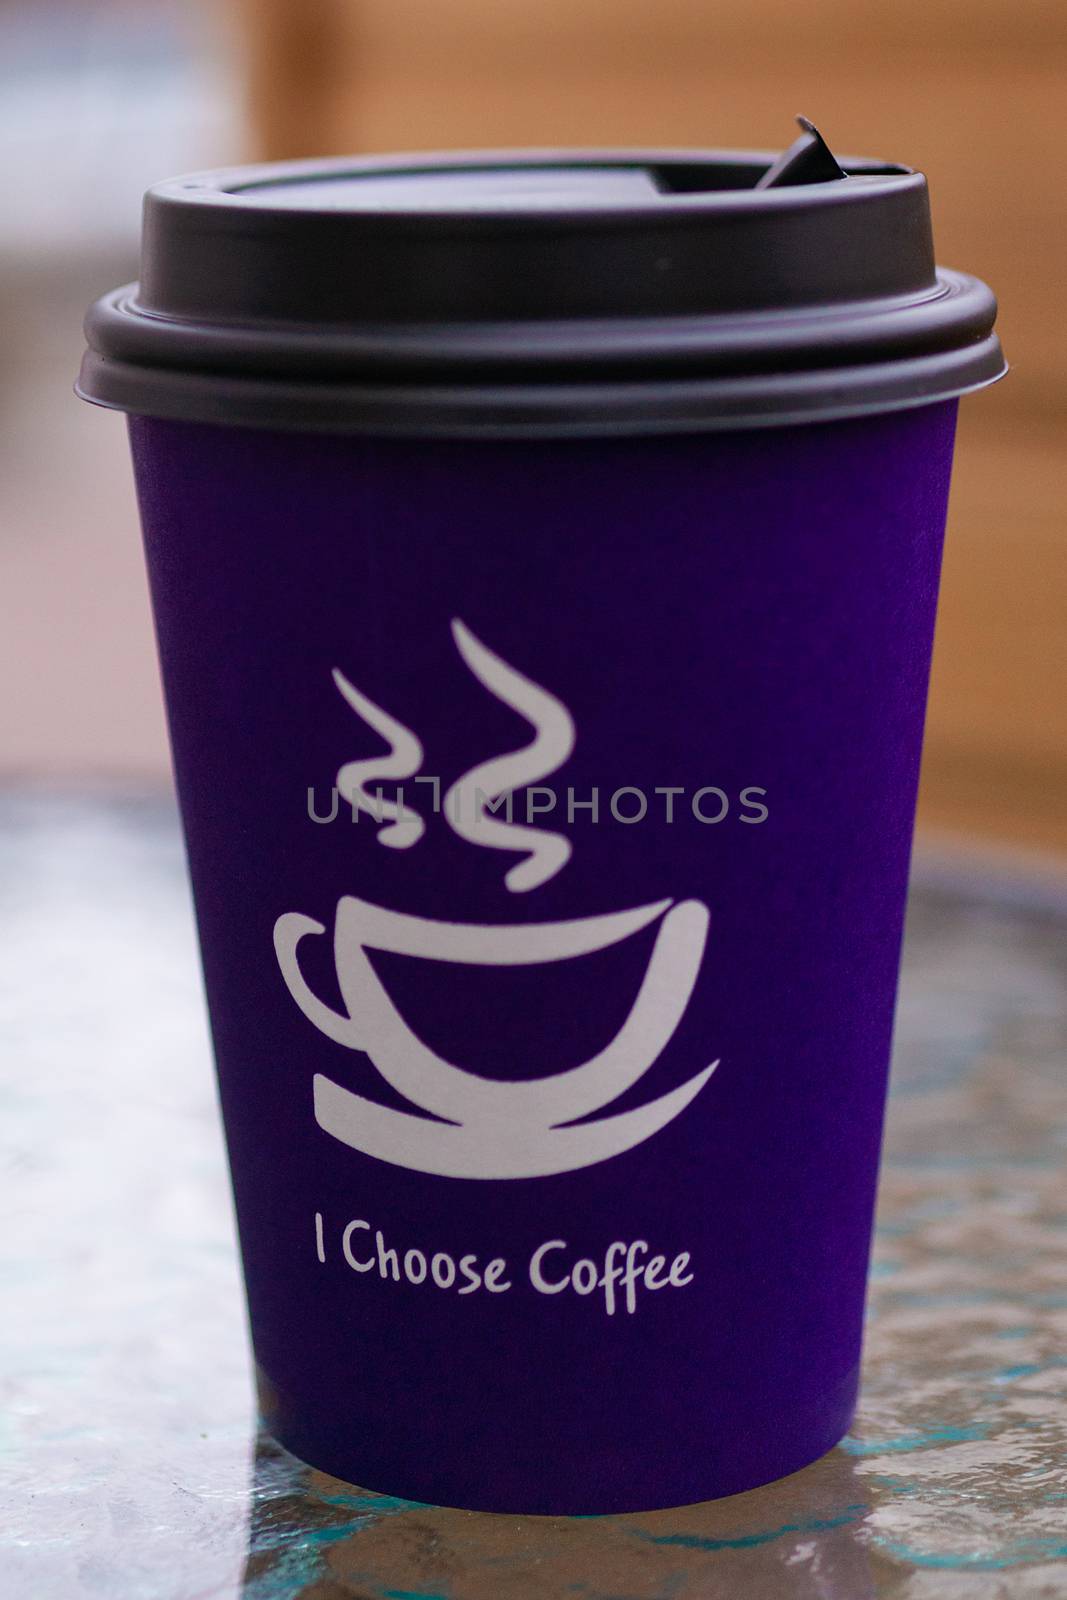 Purple coffee paper cup on glass clear table. On cup wrote: "I choose coffee". Beginning a good day!